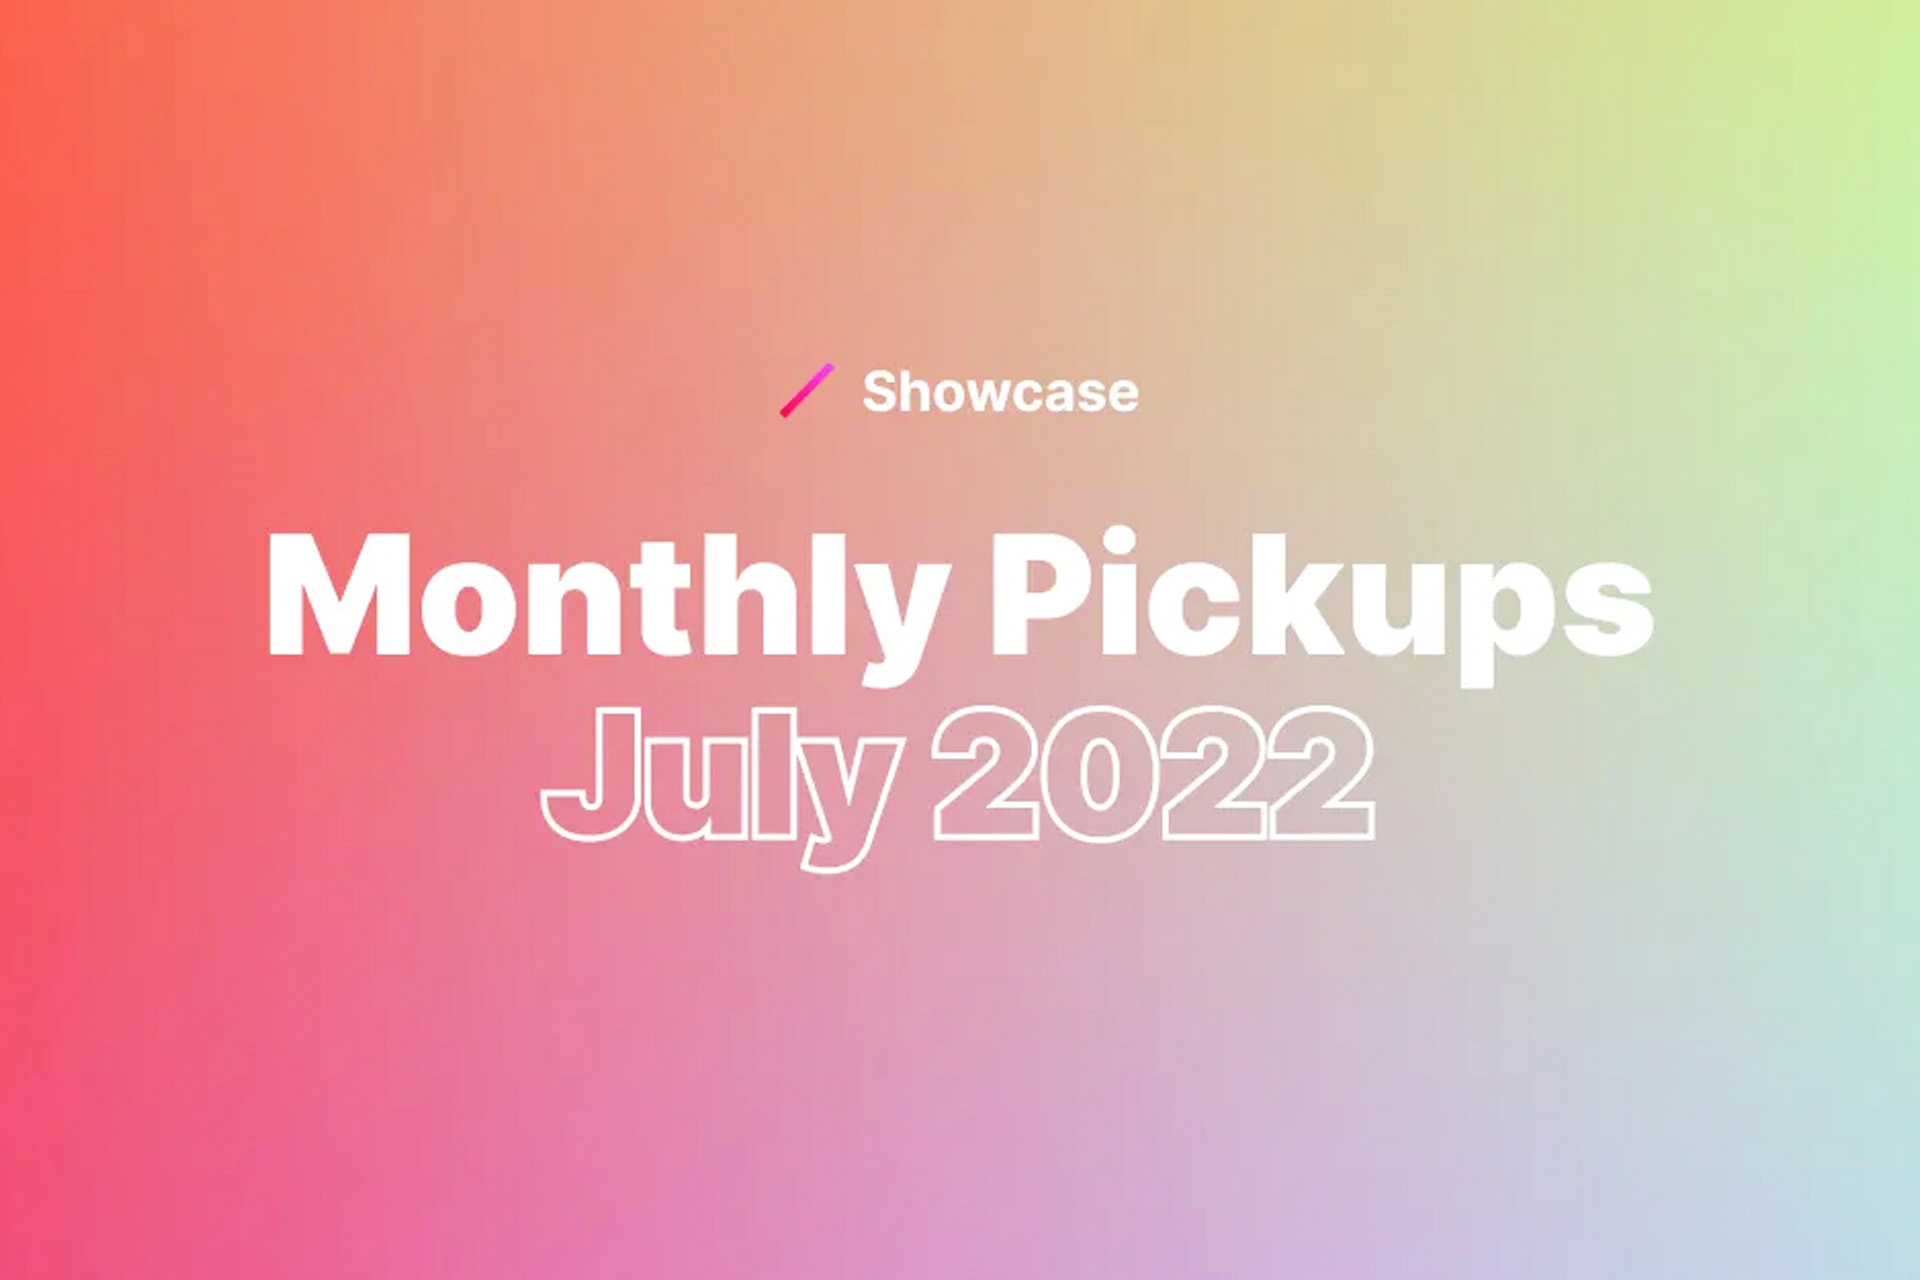 STUDIO Showcase Monthly Pickups July 2022に「STEP UP KID’S GYM」が選出されました！